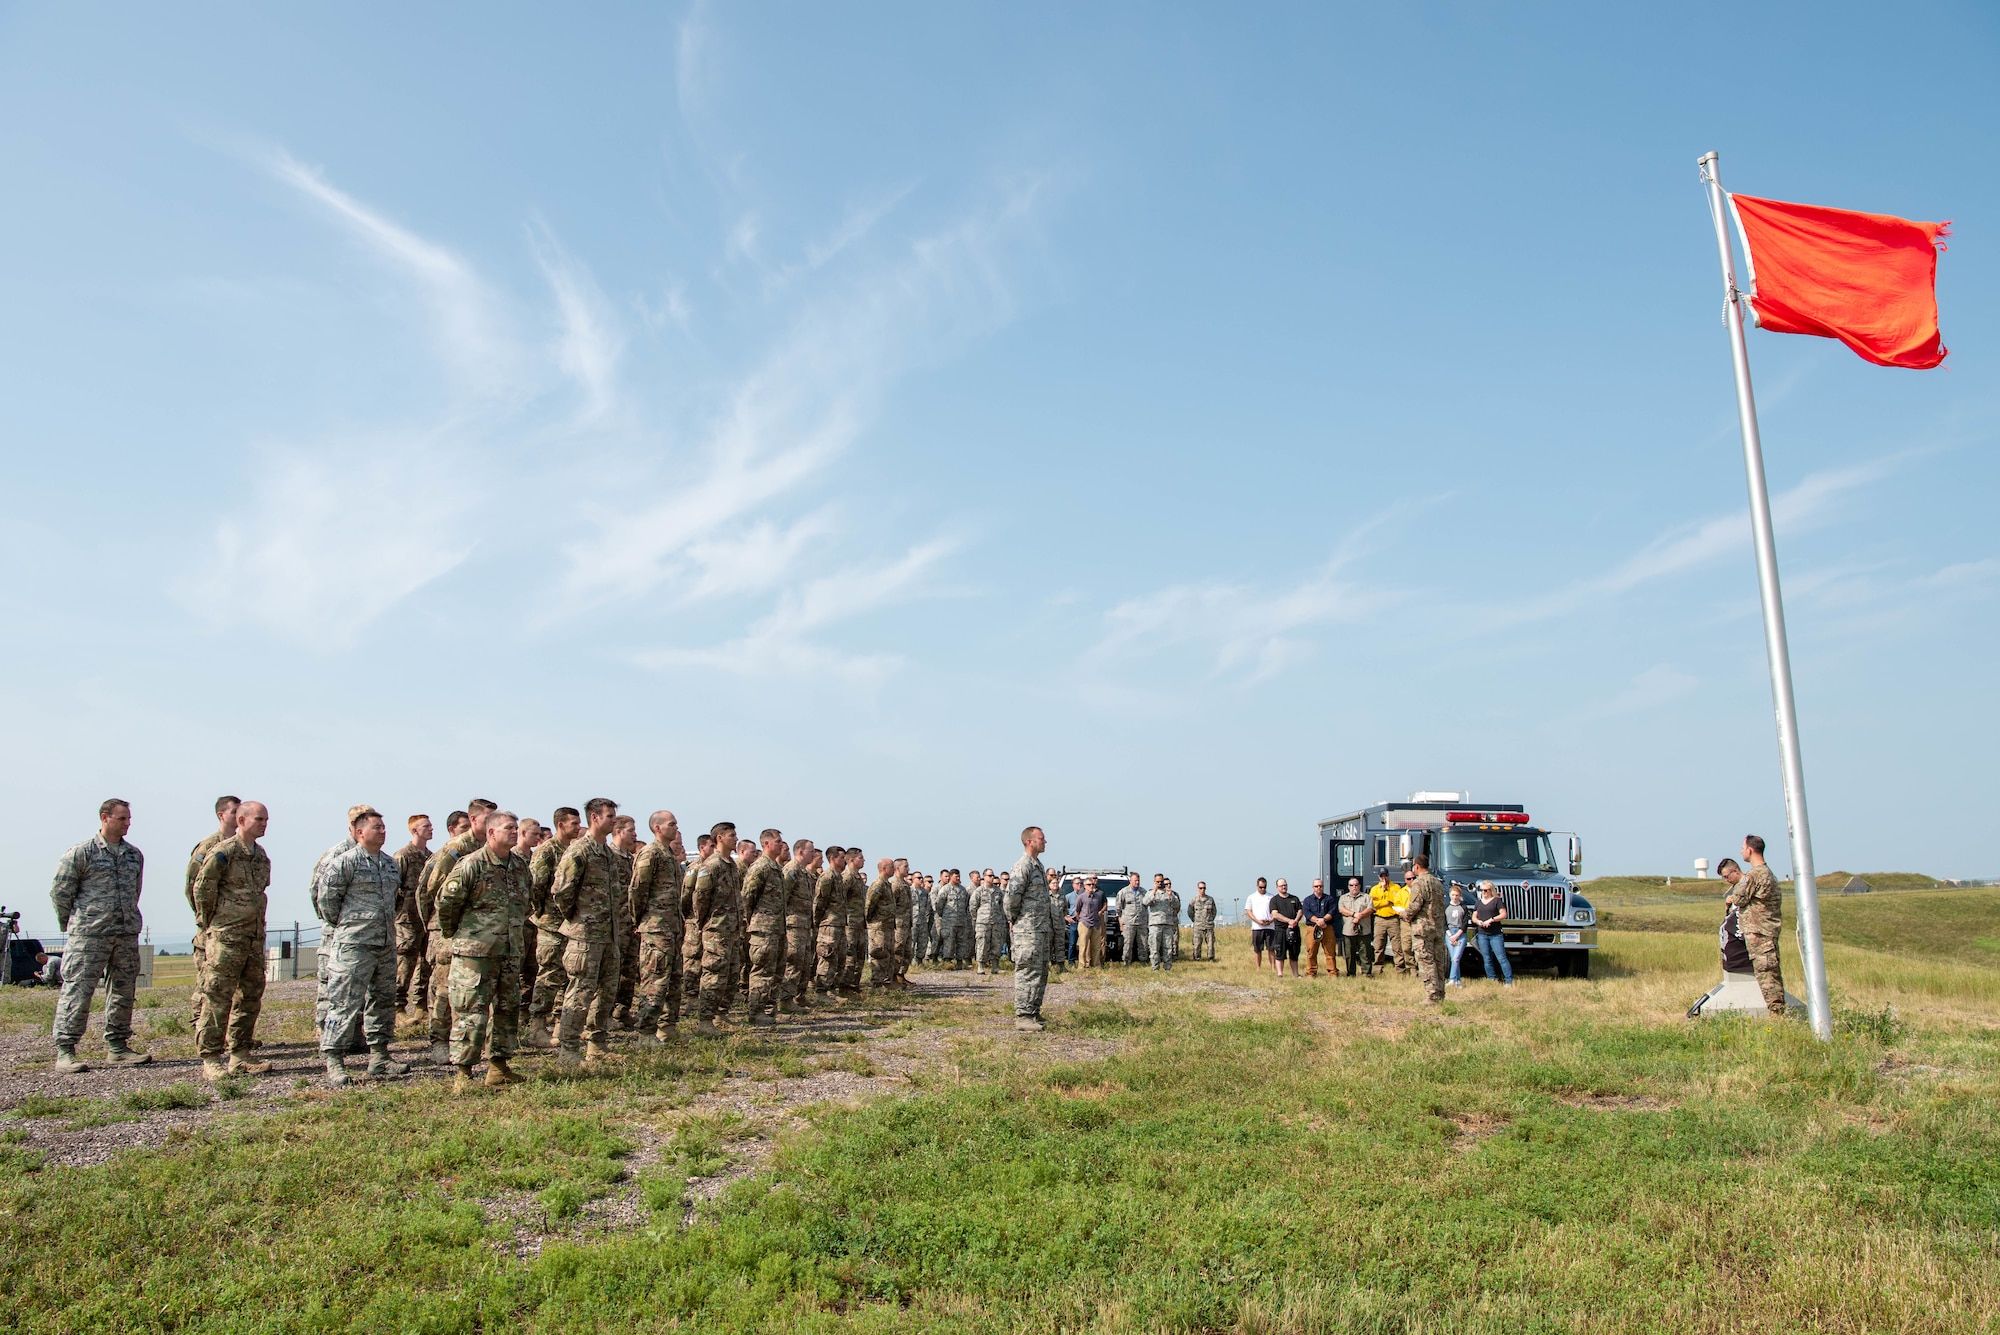 A ceremony is held to dedicate the explosive ordnance disposal range at Ellsworth Air Force Base, S.D., Aug. 17, 2018. The range was named in honor of Staff Sgt. Bryan D. Berky, an EOD technician deployed from Ellsworth AFB who was killed in action on Sept. 12, 2009, while serving in the western province of Farah, Afghanistan. (U.S. Air Force photo by Tech. Sgt. Jette Carr)